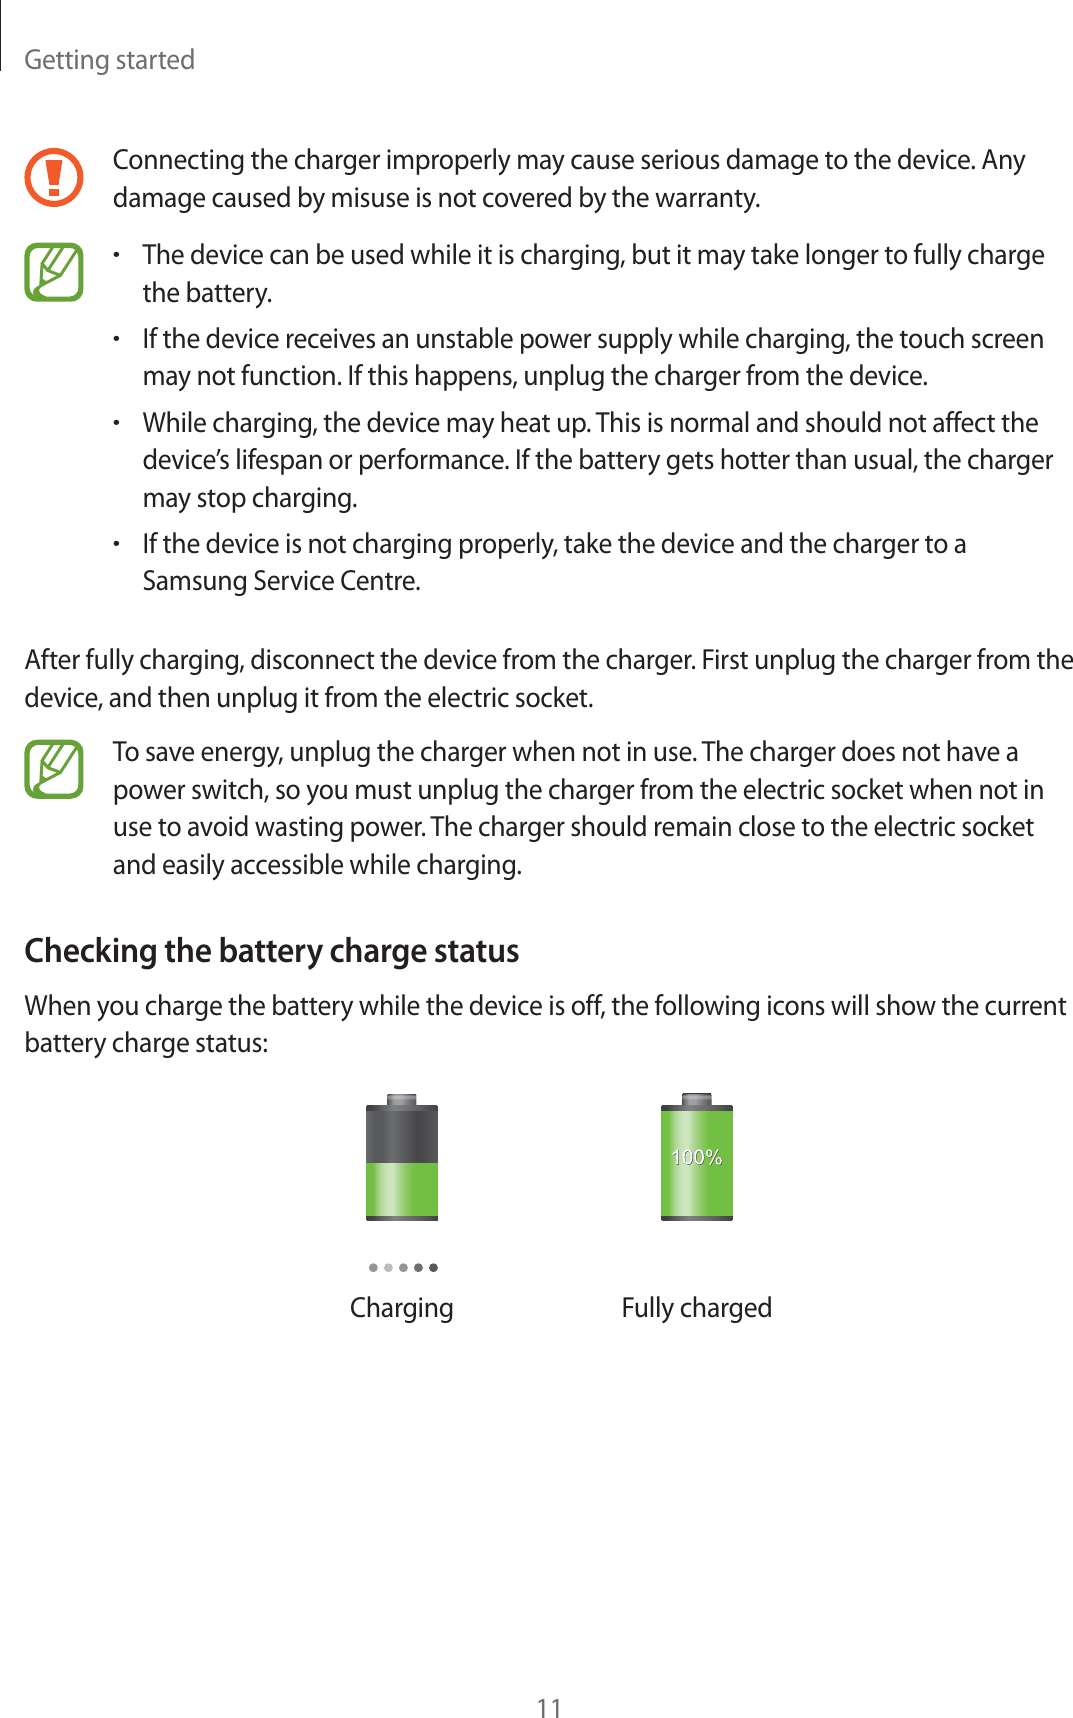 Getting started11Connecting the charger improperly may cause serious damage to the device. Any damage caused by misuse is not covered by the warranty.rThe device can be used while it is charging, but it may take longer to fully charge the battery.rIf the device receives an unstable power supply while charging, the touch screen may not function. If this happens, unplug the charger from the device.rWhile charging, the device may heat up. This is normal and should not affect the device’s lifespan or performance. If the battery gets hotter than usual, the charger may stop charging.rIf the device is not charging properly, take the device and the charger to a Samsung Service Centre.After fully charging, disconnect the device from the charger. First unplug the charger from the device, and then unplug it from the electric socket.To save energy, unplug the charger when not in use. The charger does not have a power switch, so you must unplug the charger from the electric socket when not in use to avoid wasting power. The charger should remain close to the electric socket and easily accessible while charging.Checking the battery charge statusWhen you charge the battery while the device is off, the following icons will show the current battery charge status:Charging Fully charged